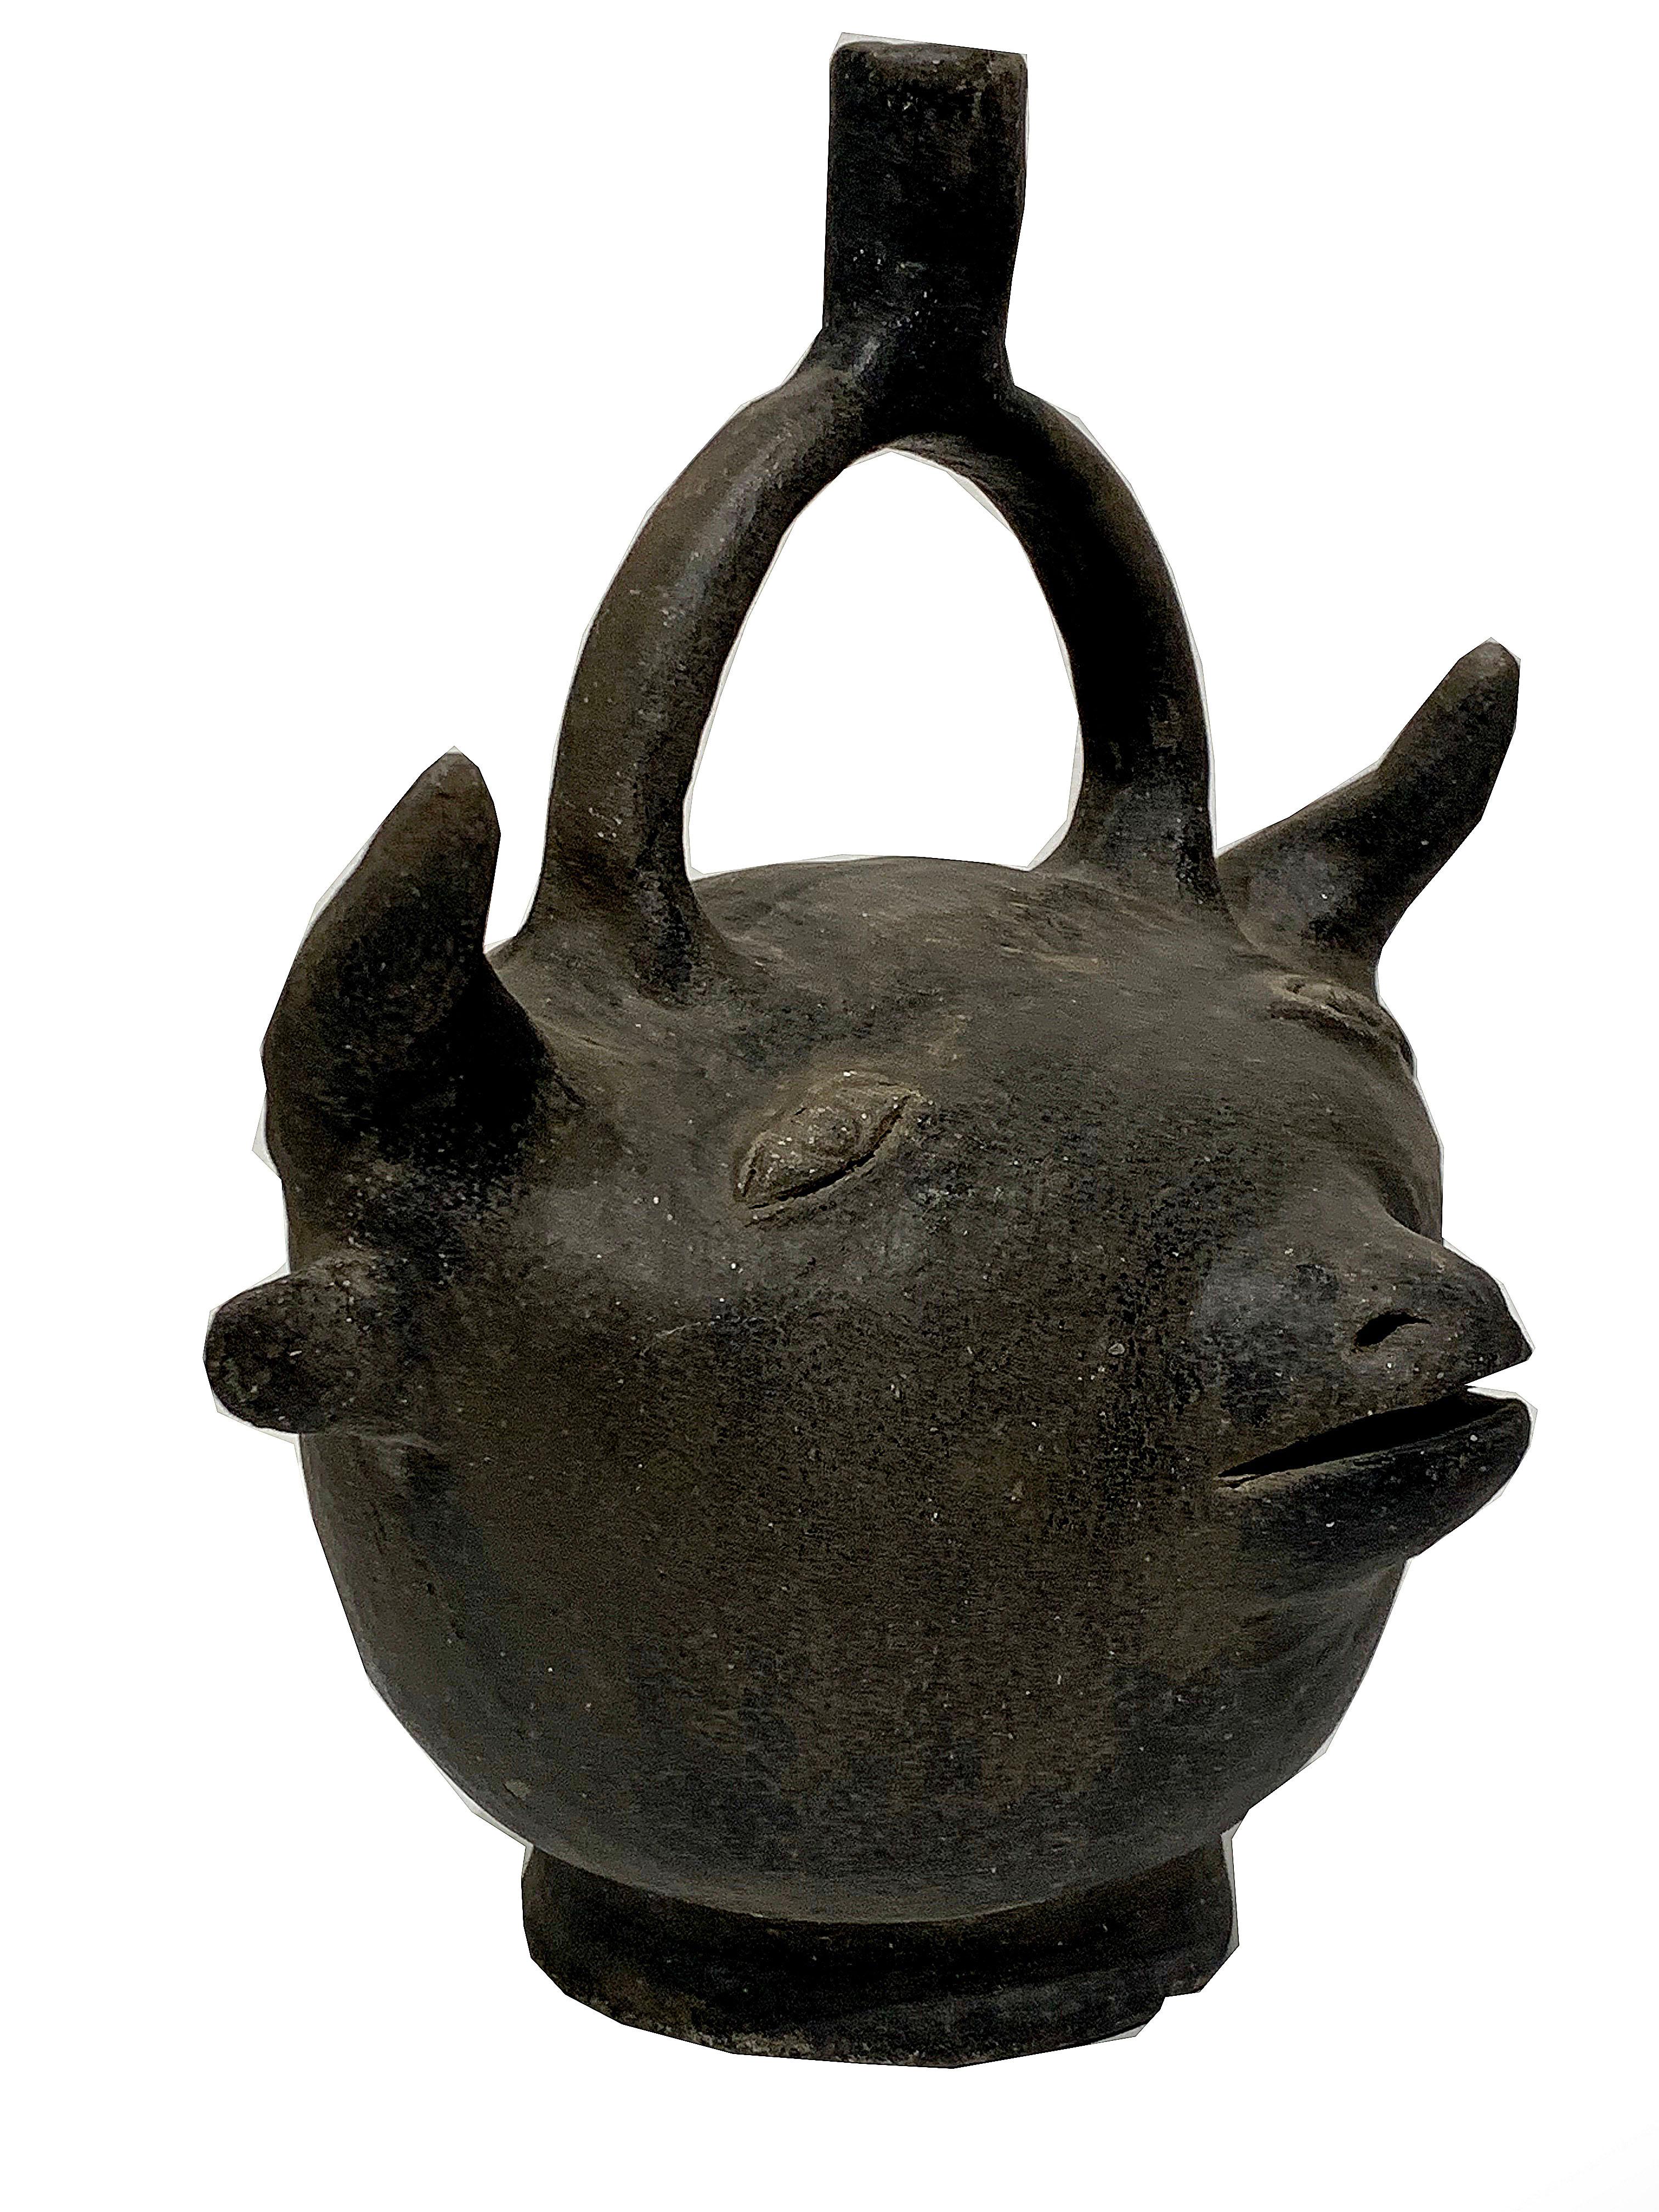 A unique take on a piggy bank, though there is no simple way to remove the coins. With that in mind, we view this as a double faced bull and devil sculpture. Dark brown ceramic, with noticeable variations in color due to age, otherwise in excellent